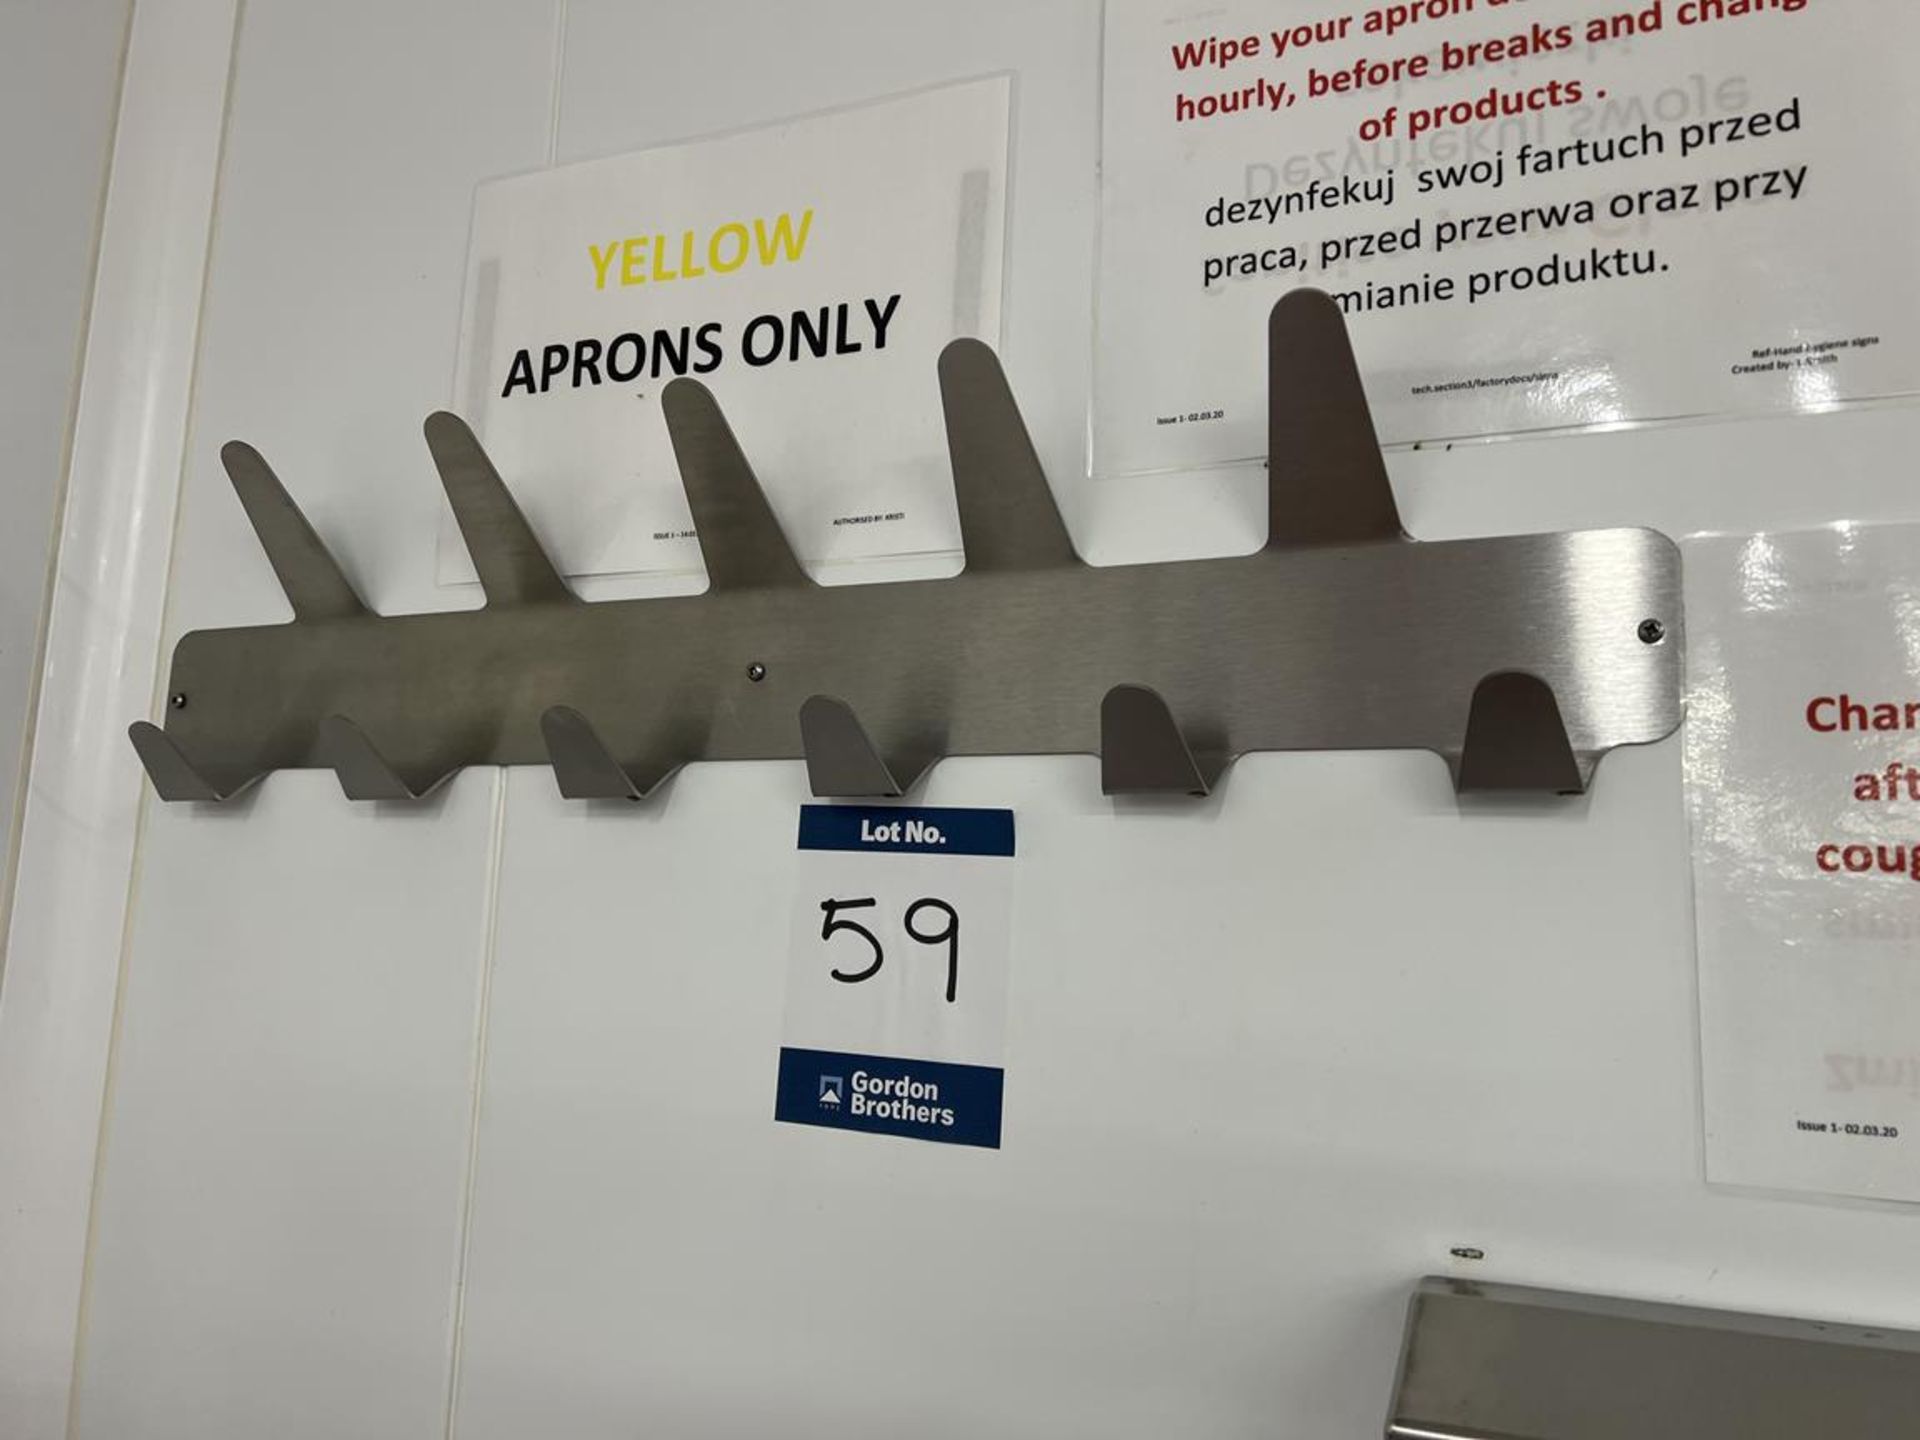 4x (no.) stainless steel wall mounted apron hangers including 2x stainless steel disposable glove - Image 4 of 5